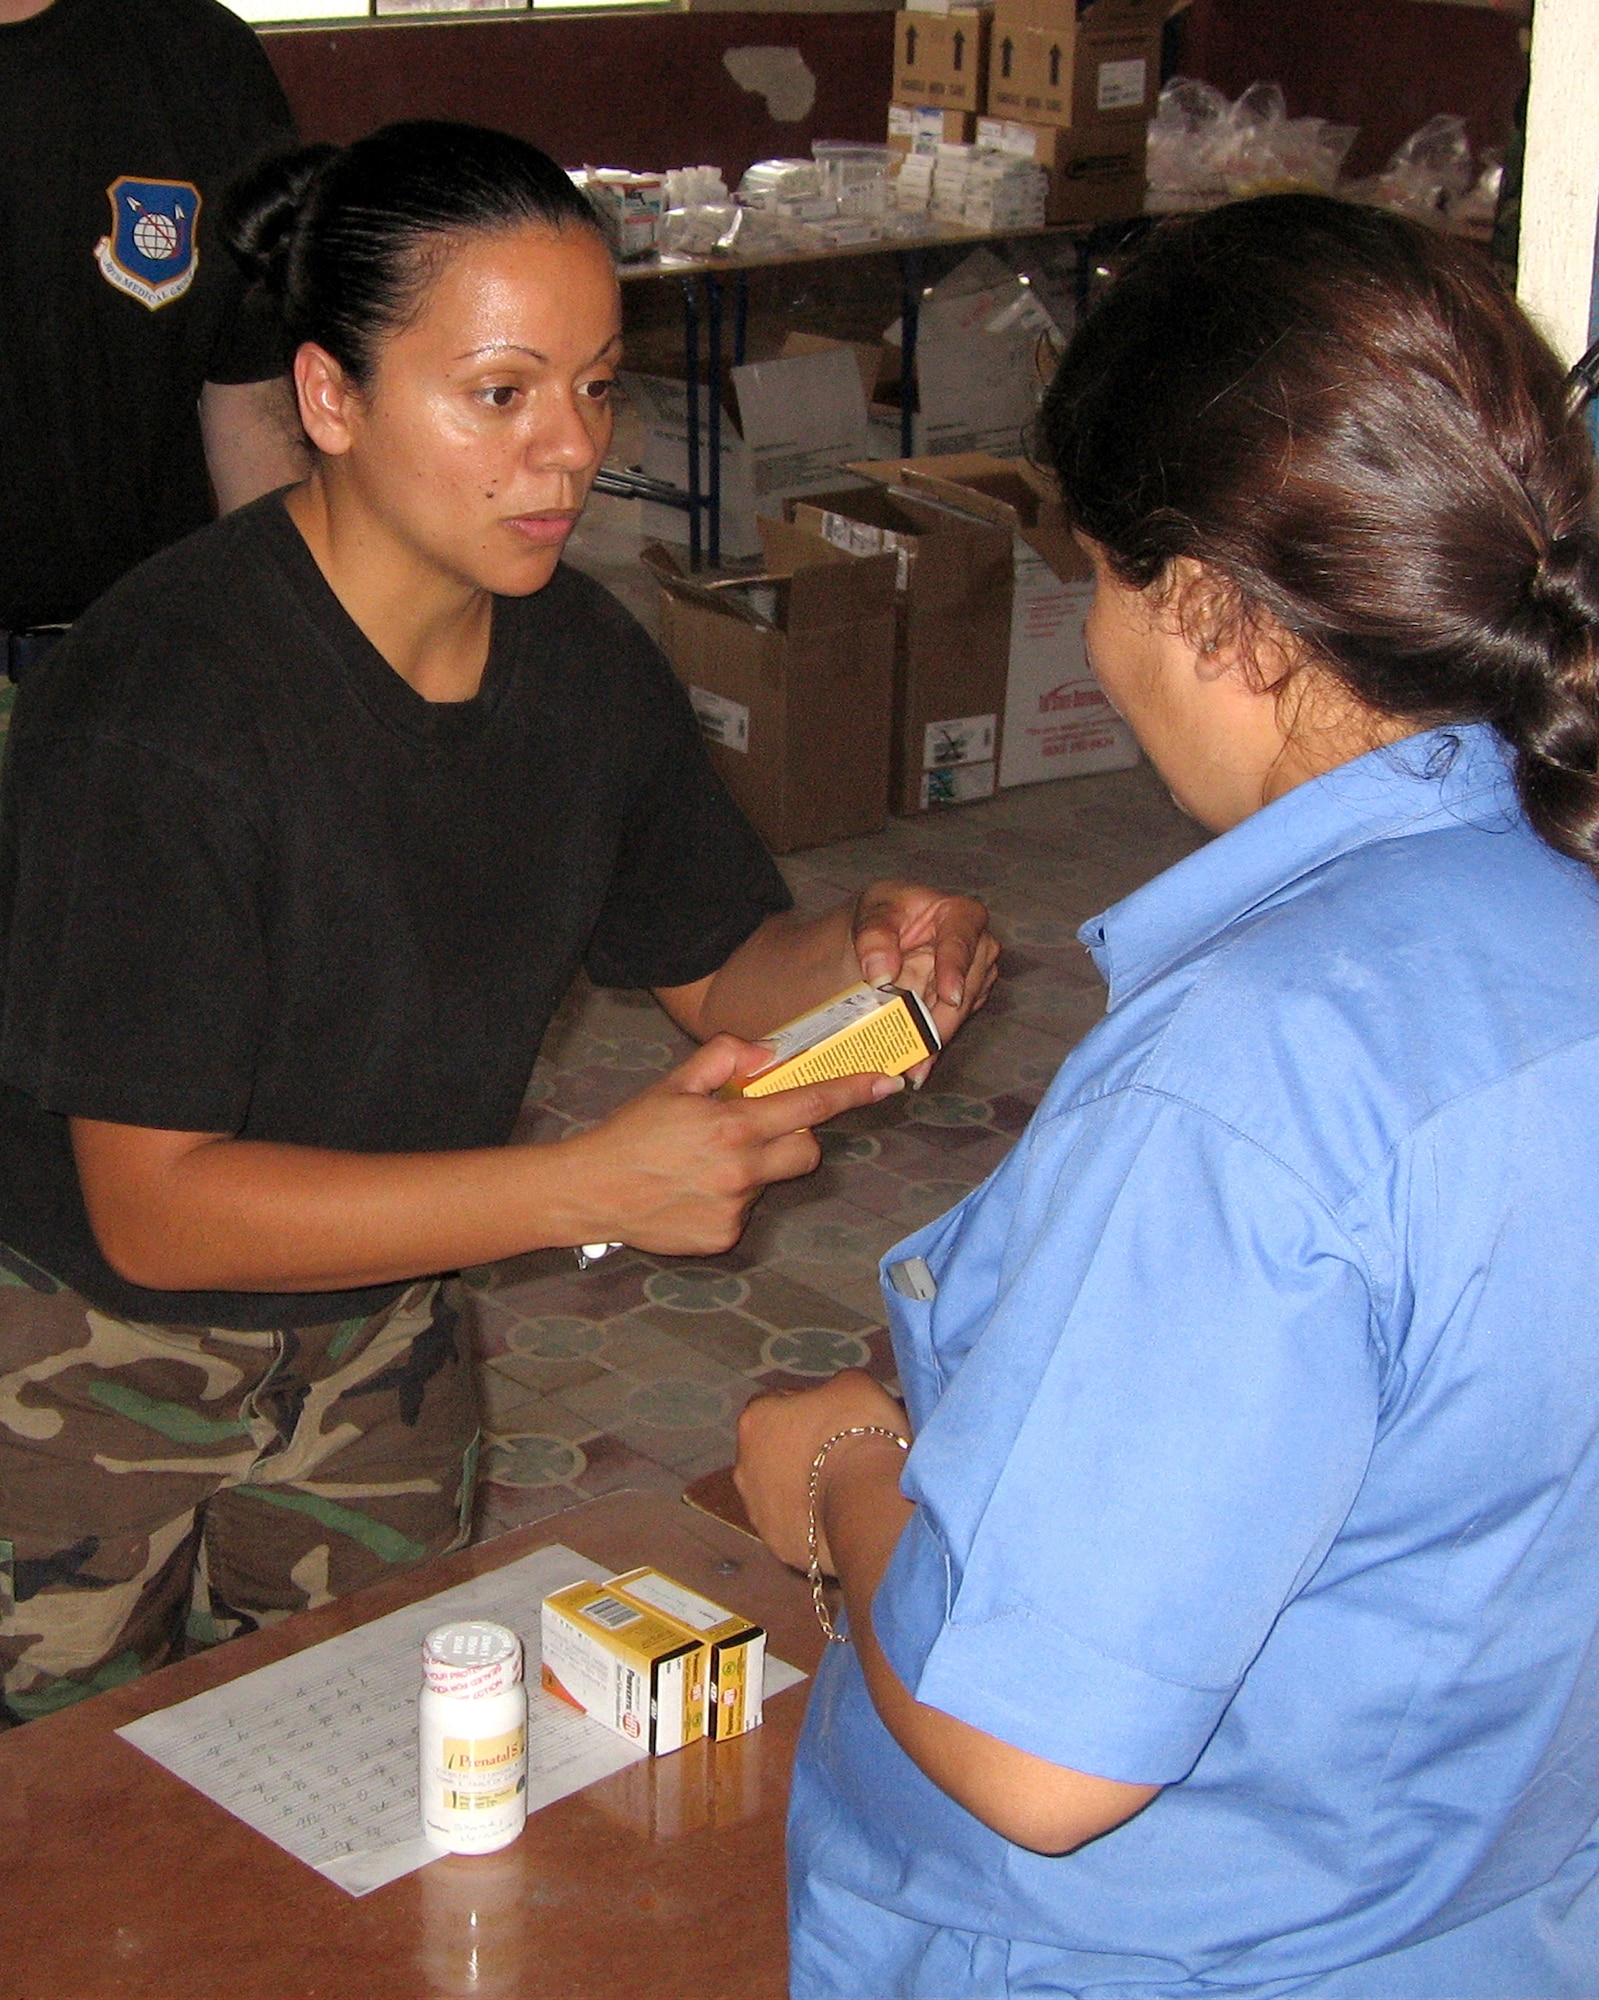 Staff Sgt. Nilsa Ramos, a pharmacy technician from Patrick Air Force Base, Fla., dispenses medicine to a Guatemalan woman during a 10-day humanitarian mission to the area in April. A team of 13 medical professionals from Air Force Space Command saw more than 8,000 patients during that time. (U.S. Air Force photo)